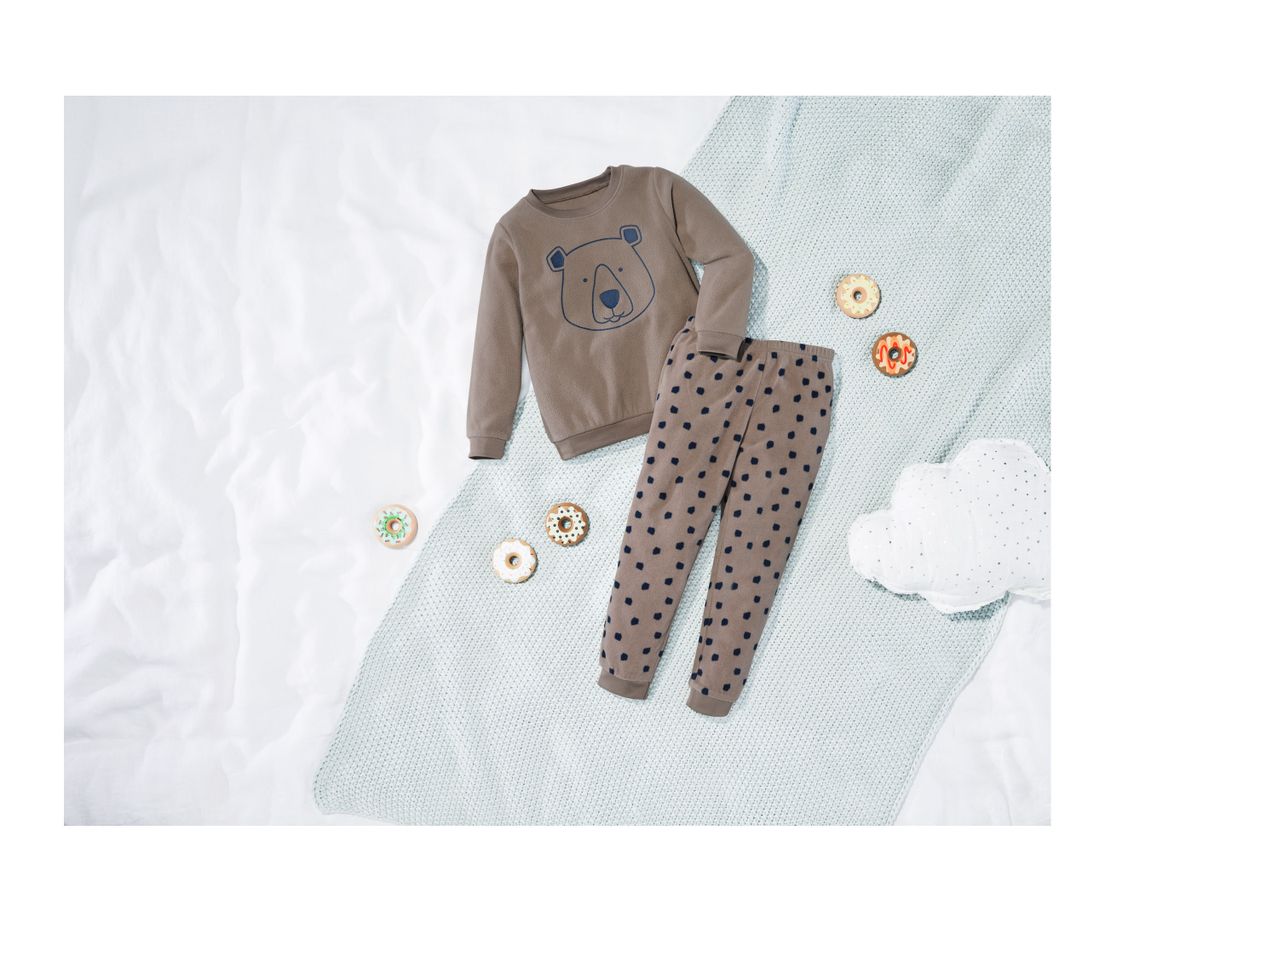 Go to full screen view: Lupilu Younger Kids' Pyjamas - Image 5